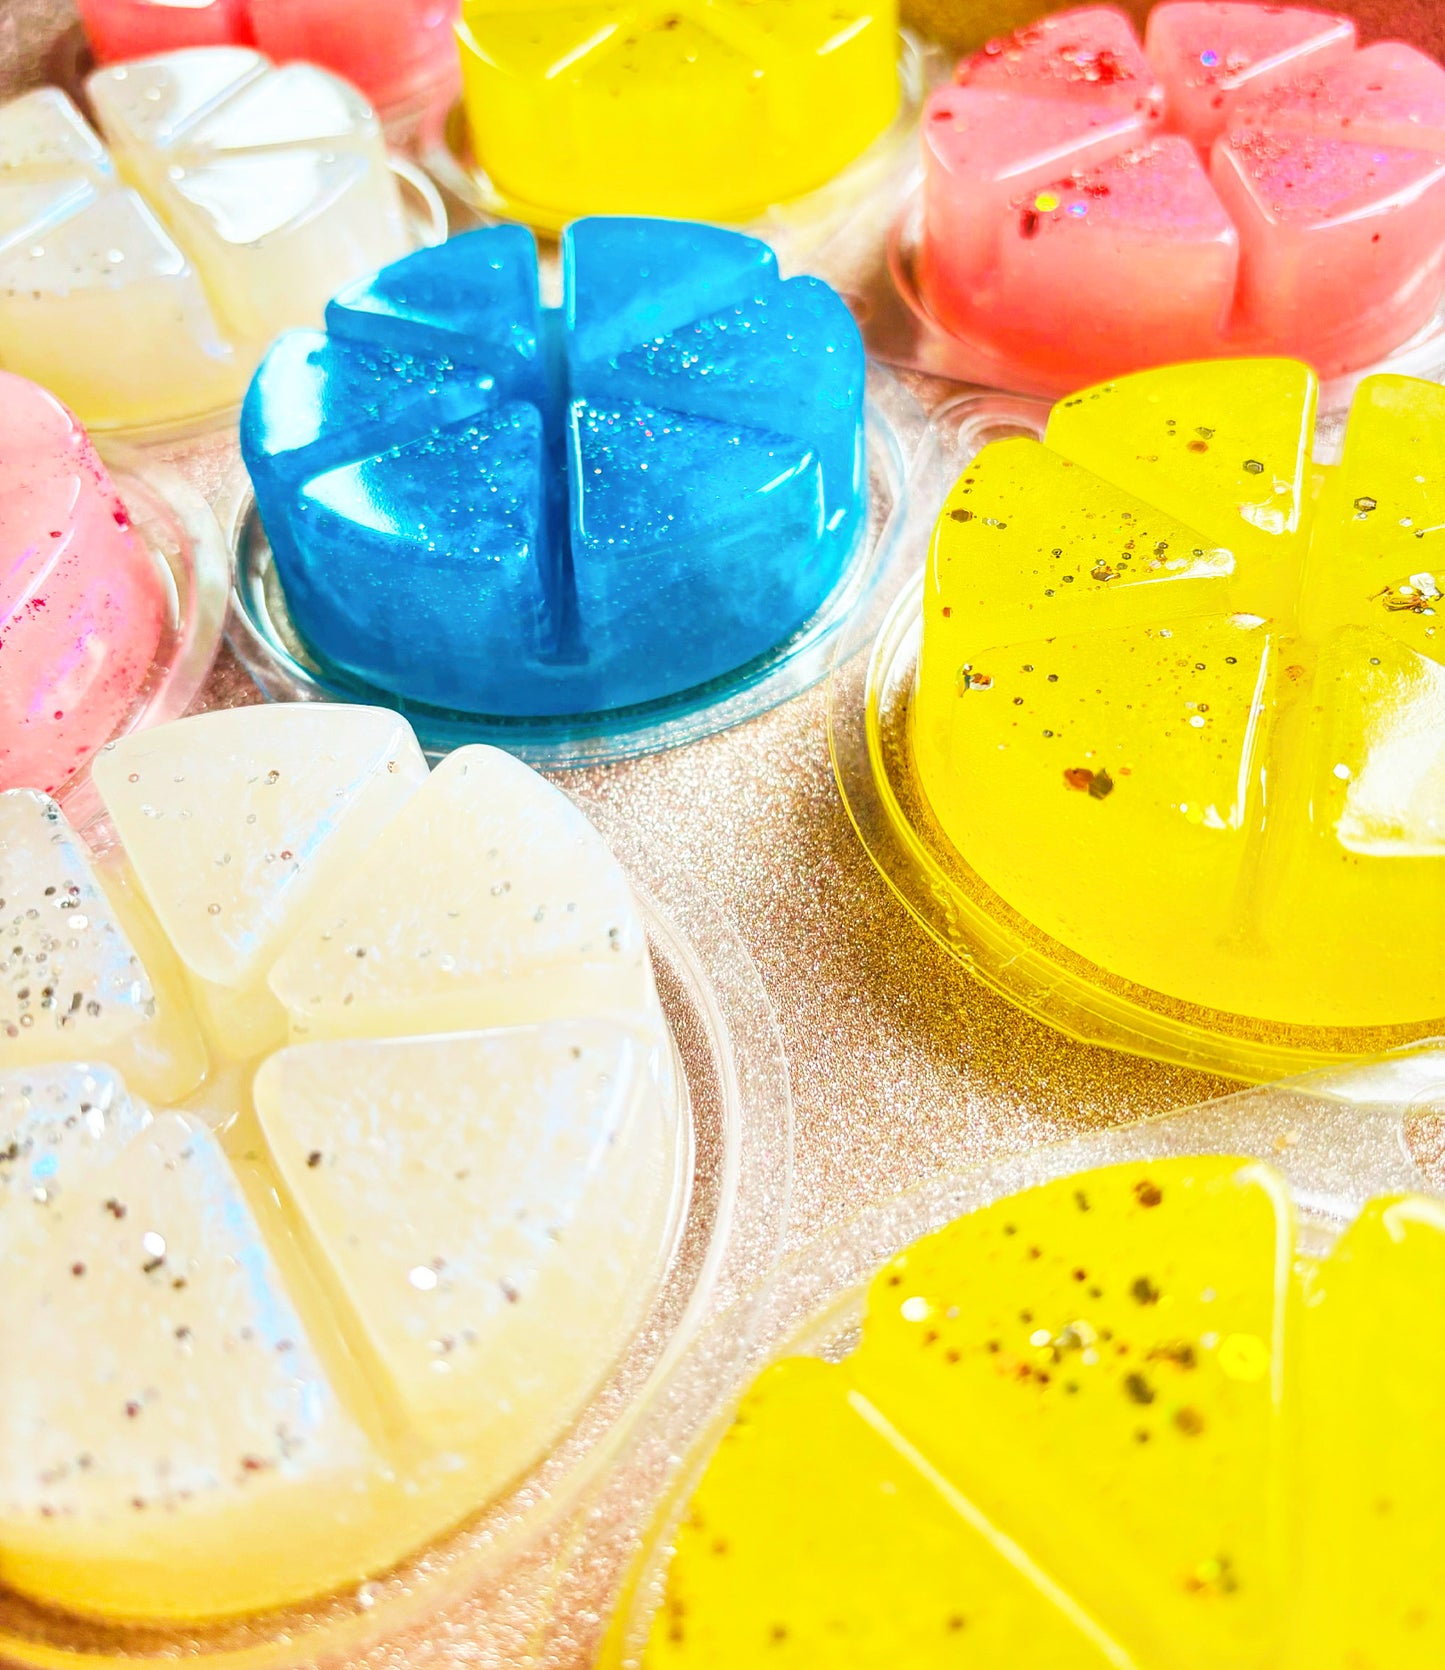 Colorful assortment of Gel Wax Melts 100g sprinkled with glitter, displayed closely together, featuring vibrant hues of blue, pink, yellow, and white from The Soap Gal x.